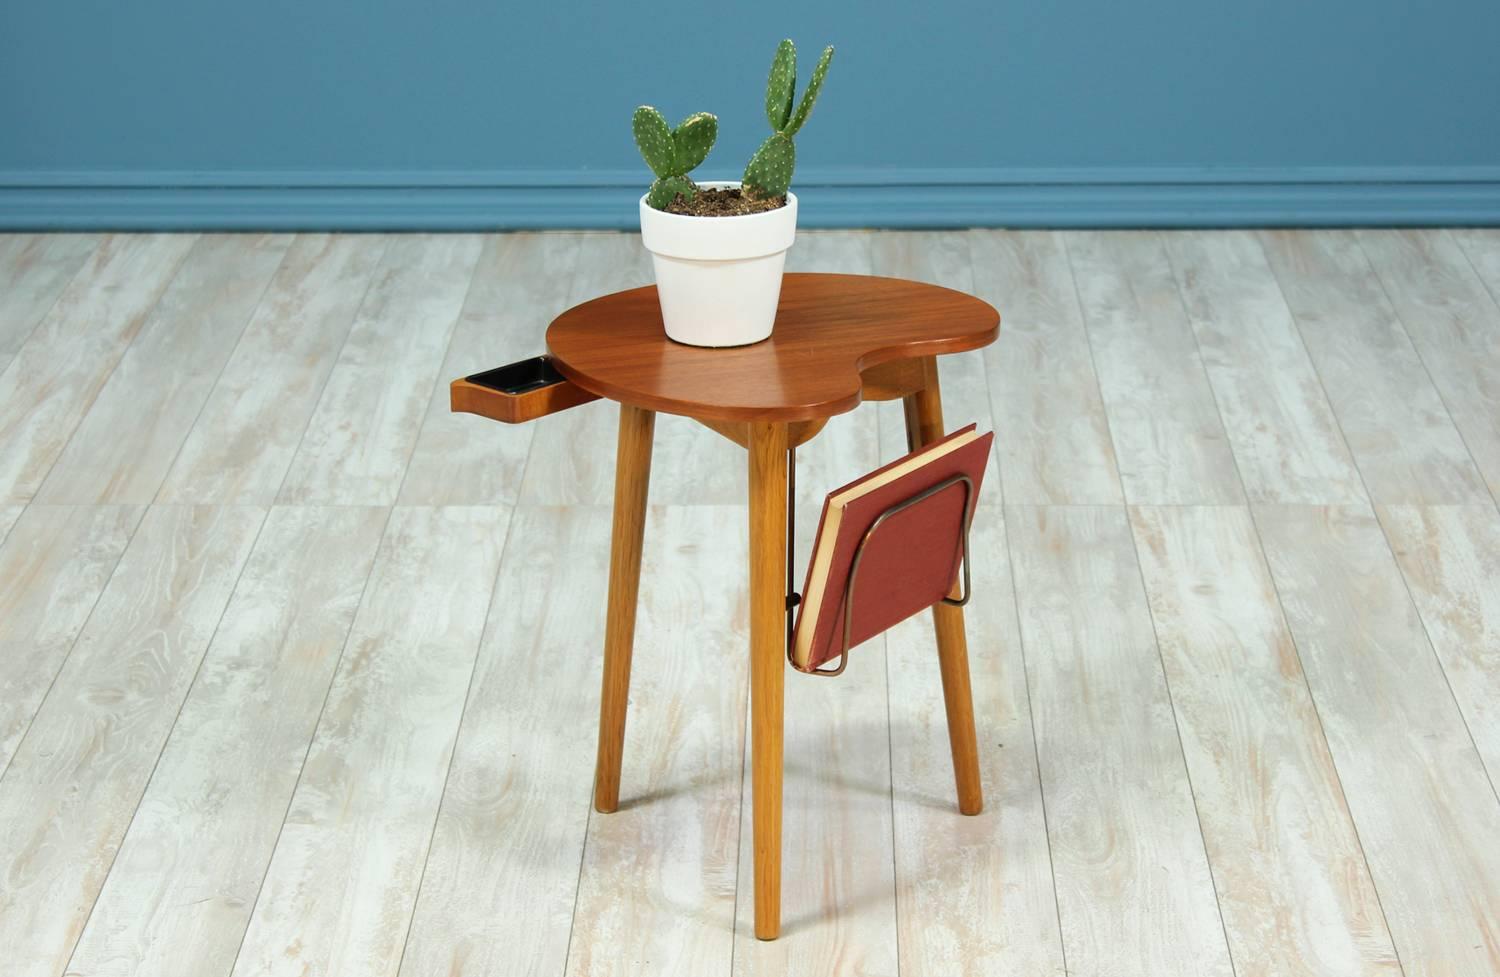 Peculiar side table manufactured by Møbelfabriken Gorm in Denmark circa 1950’s. This side table features a minimalist design with a teak table top and oak tapered legs. This exceptional model includes a hidden pull-out ashtray and a brass magazine